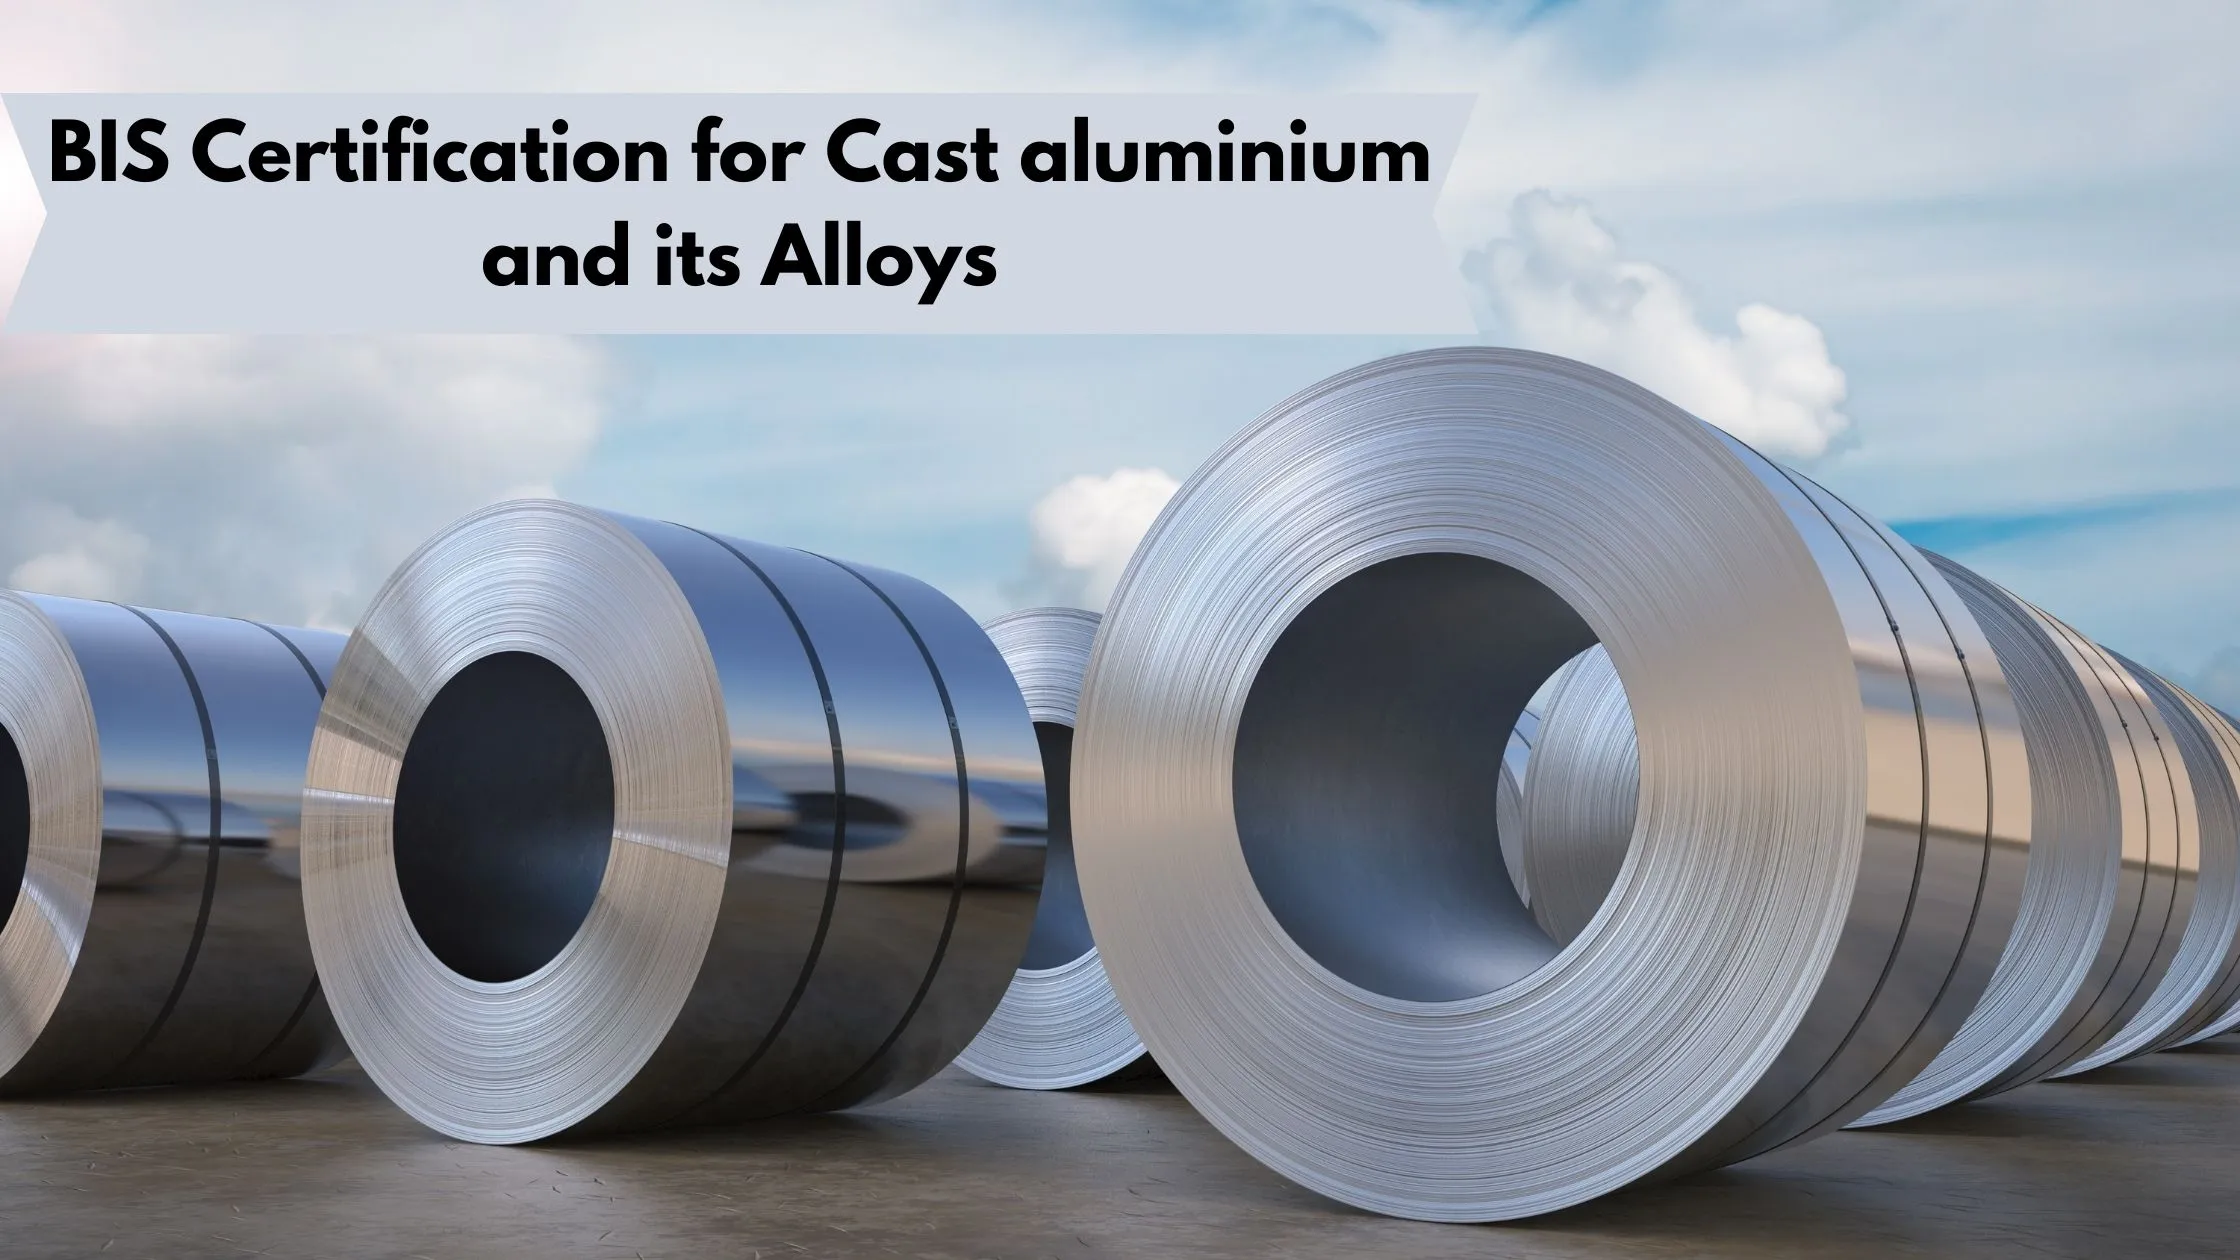 BIS Certification for Cast Aluminium and its Alloys – Ingots and Castings for General Engineering Purposes (IS 617:1994)